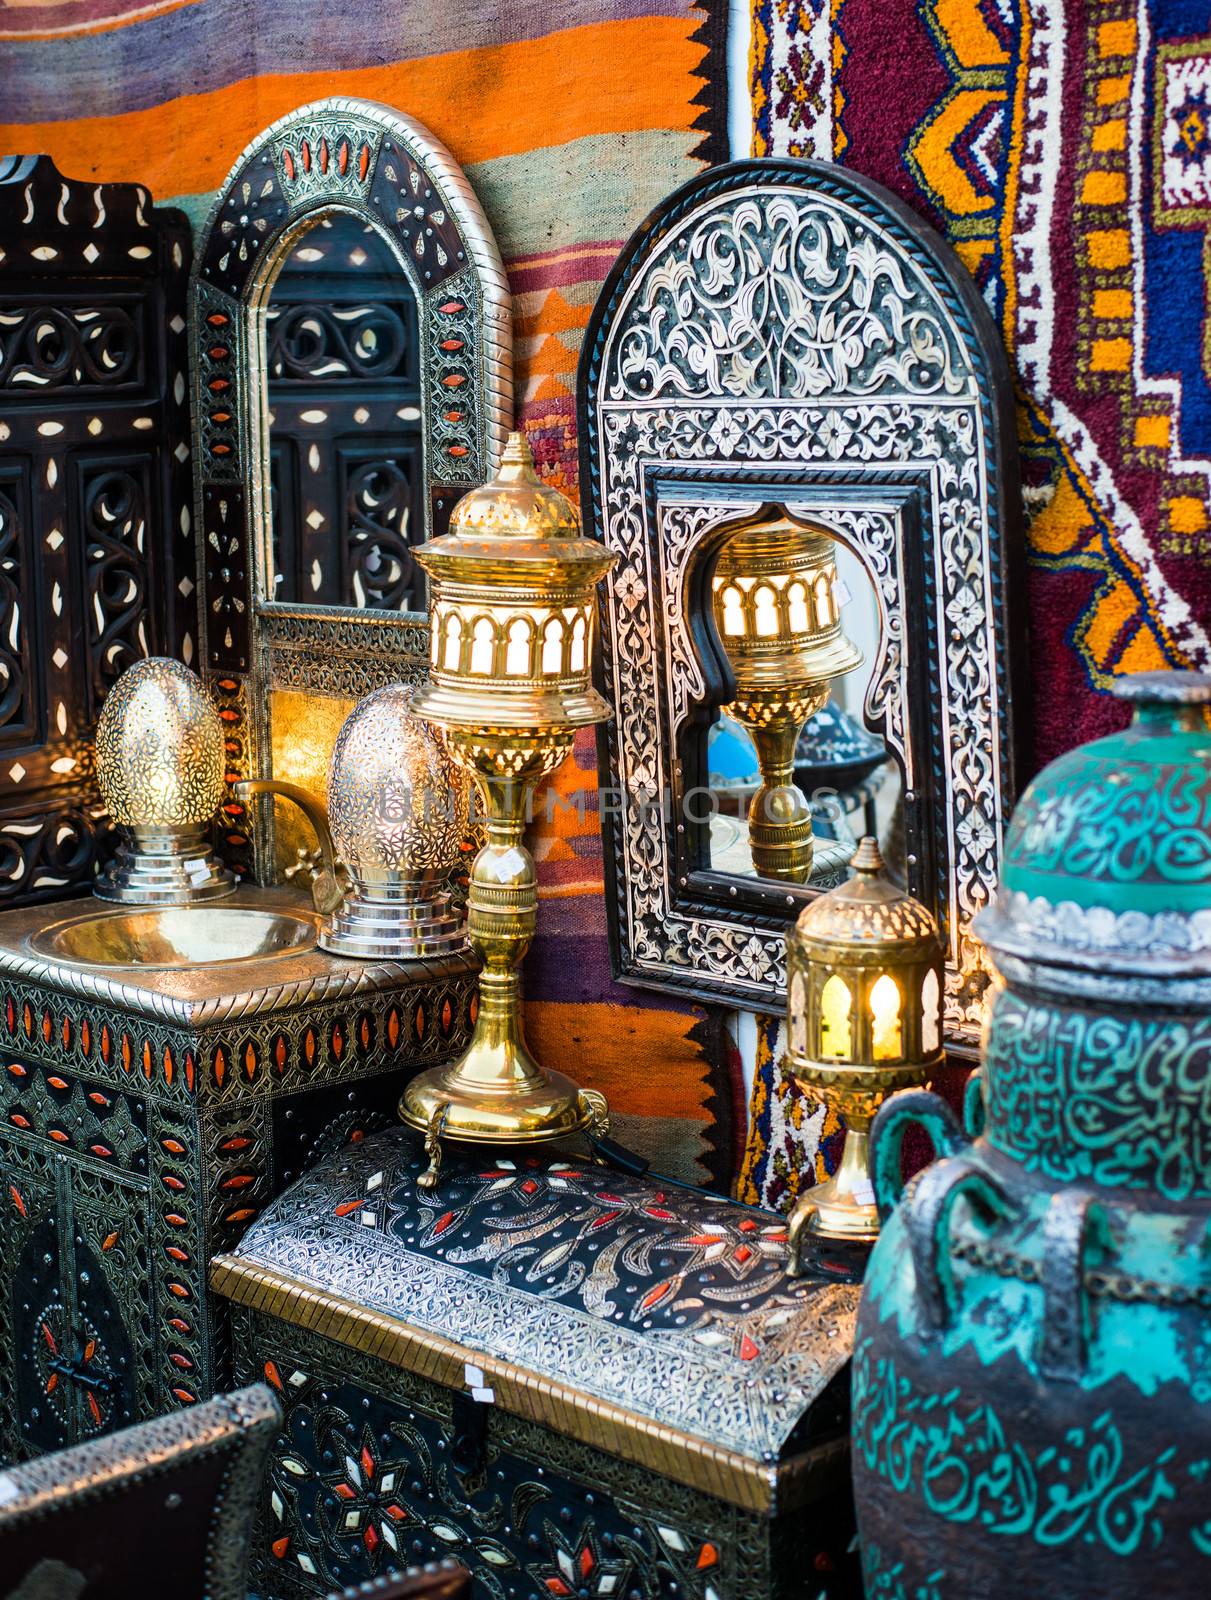 ancient oriental lamps, mirrors and chests